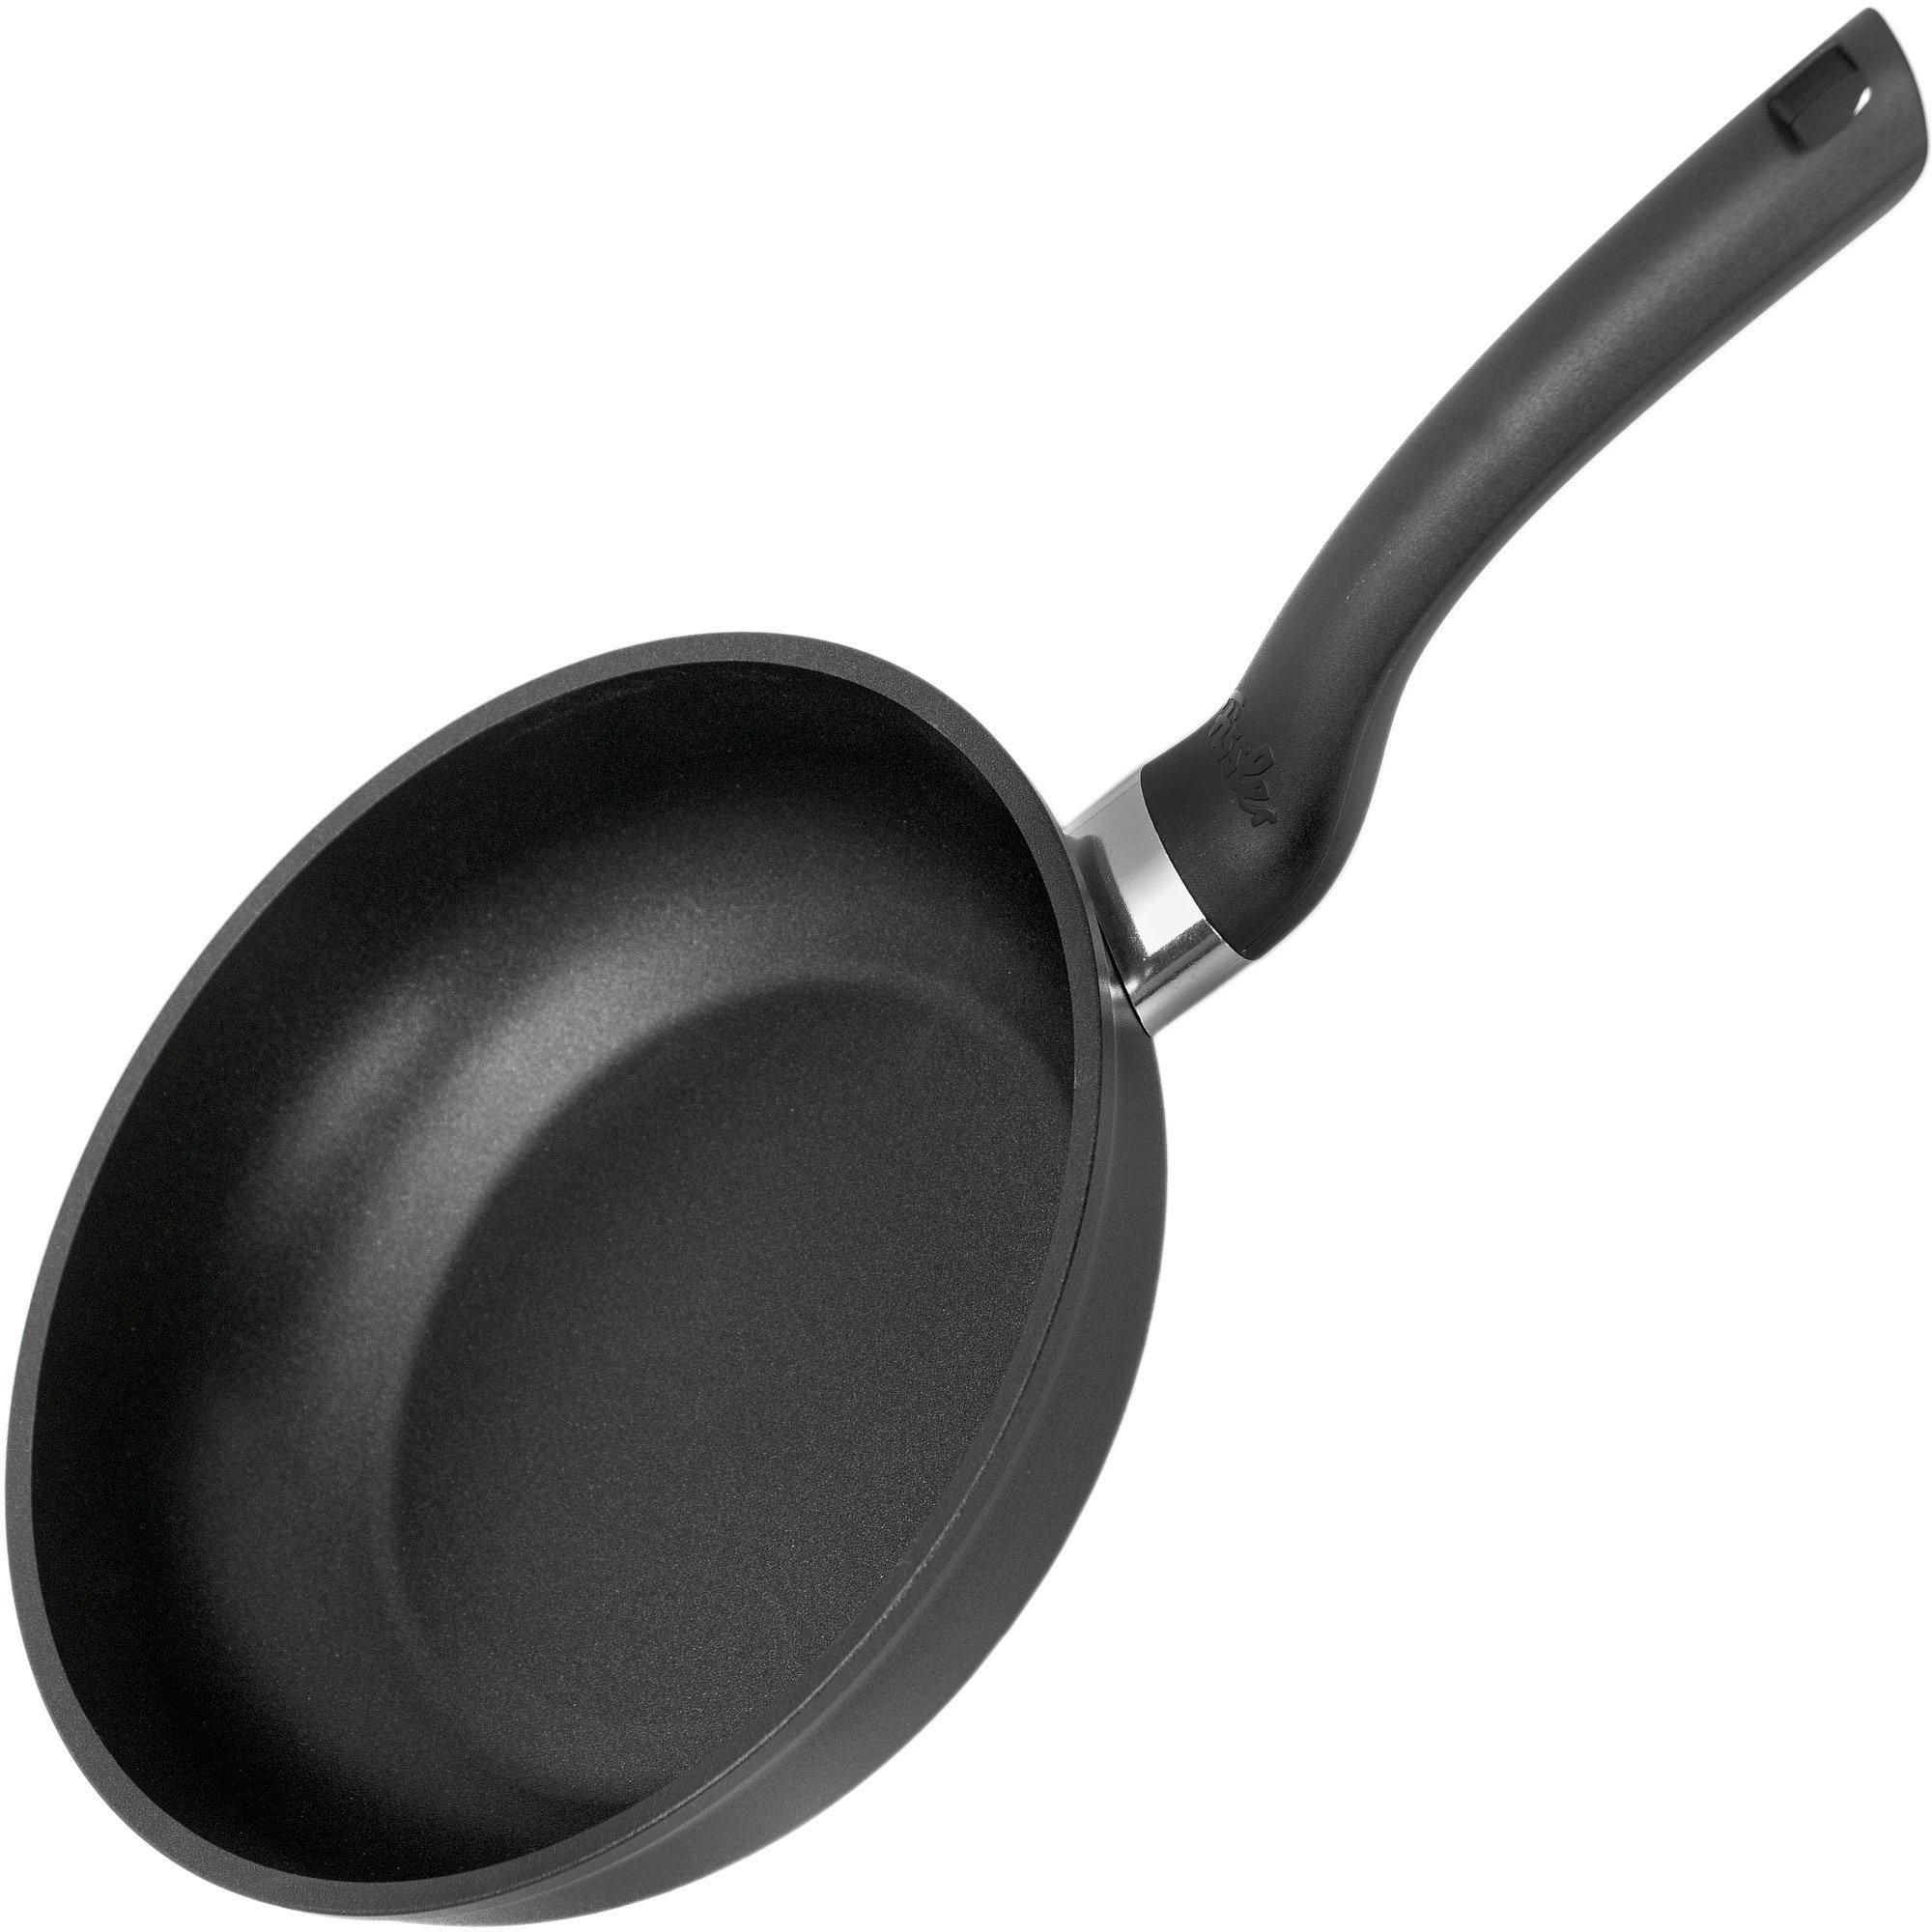 Fissler Cenit Induction cm pan at 28 | frying shopping 045-301-28-100, Advantageously